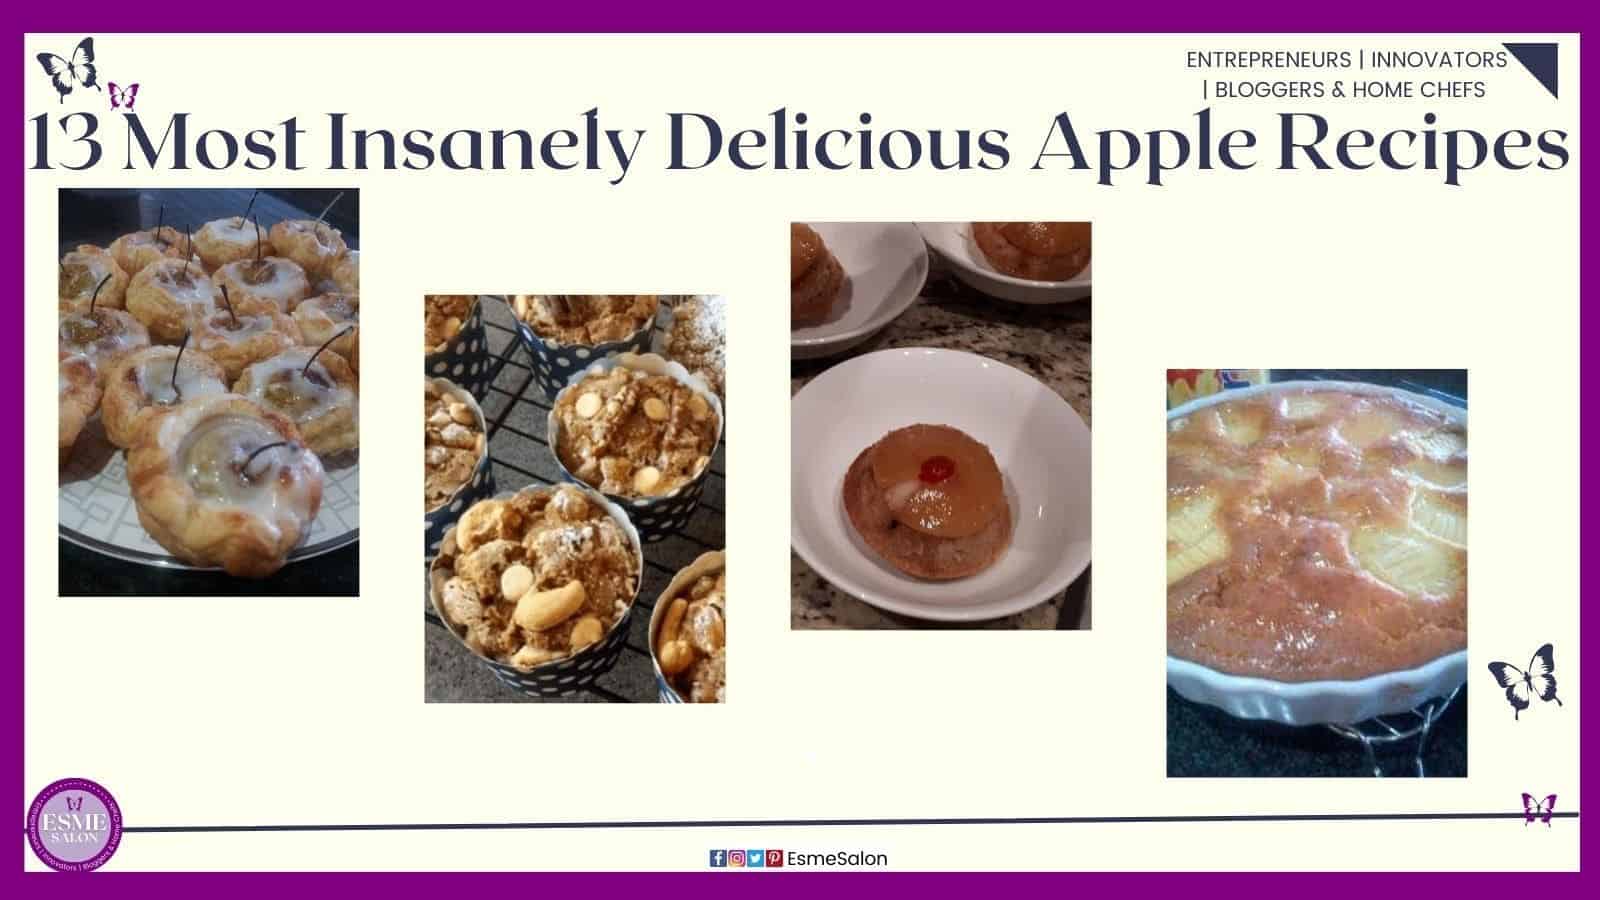 an image of 4 different apple recipes